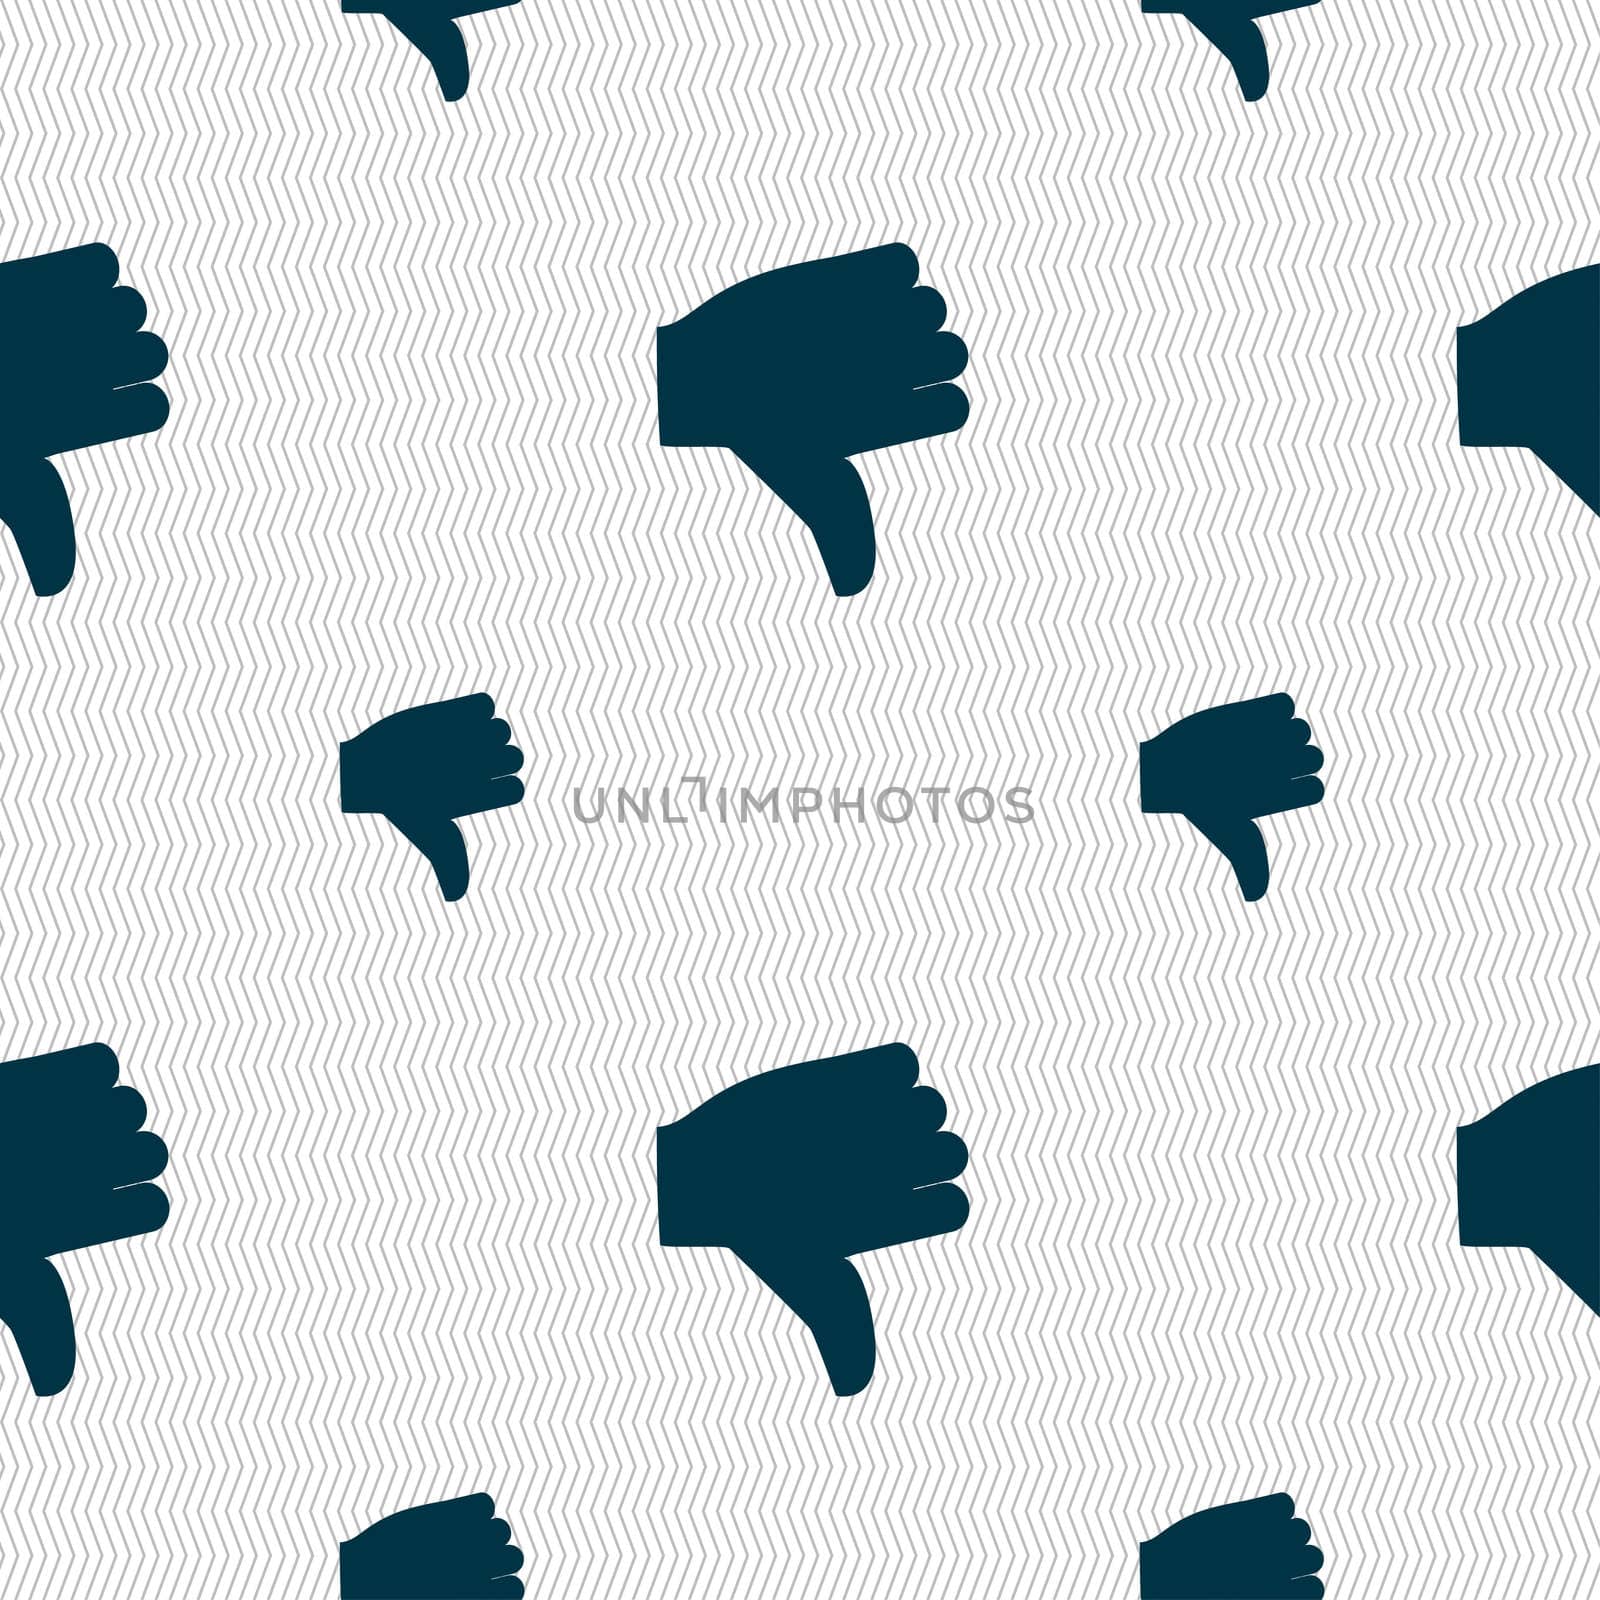 Dislike, Thumb down icon sign. Seamless pattern with geometric texture. illustration